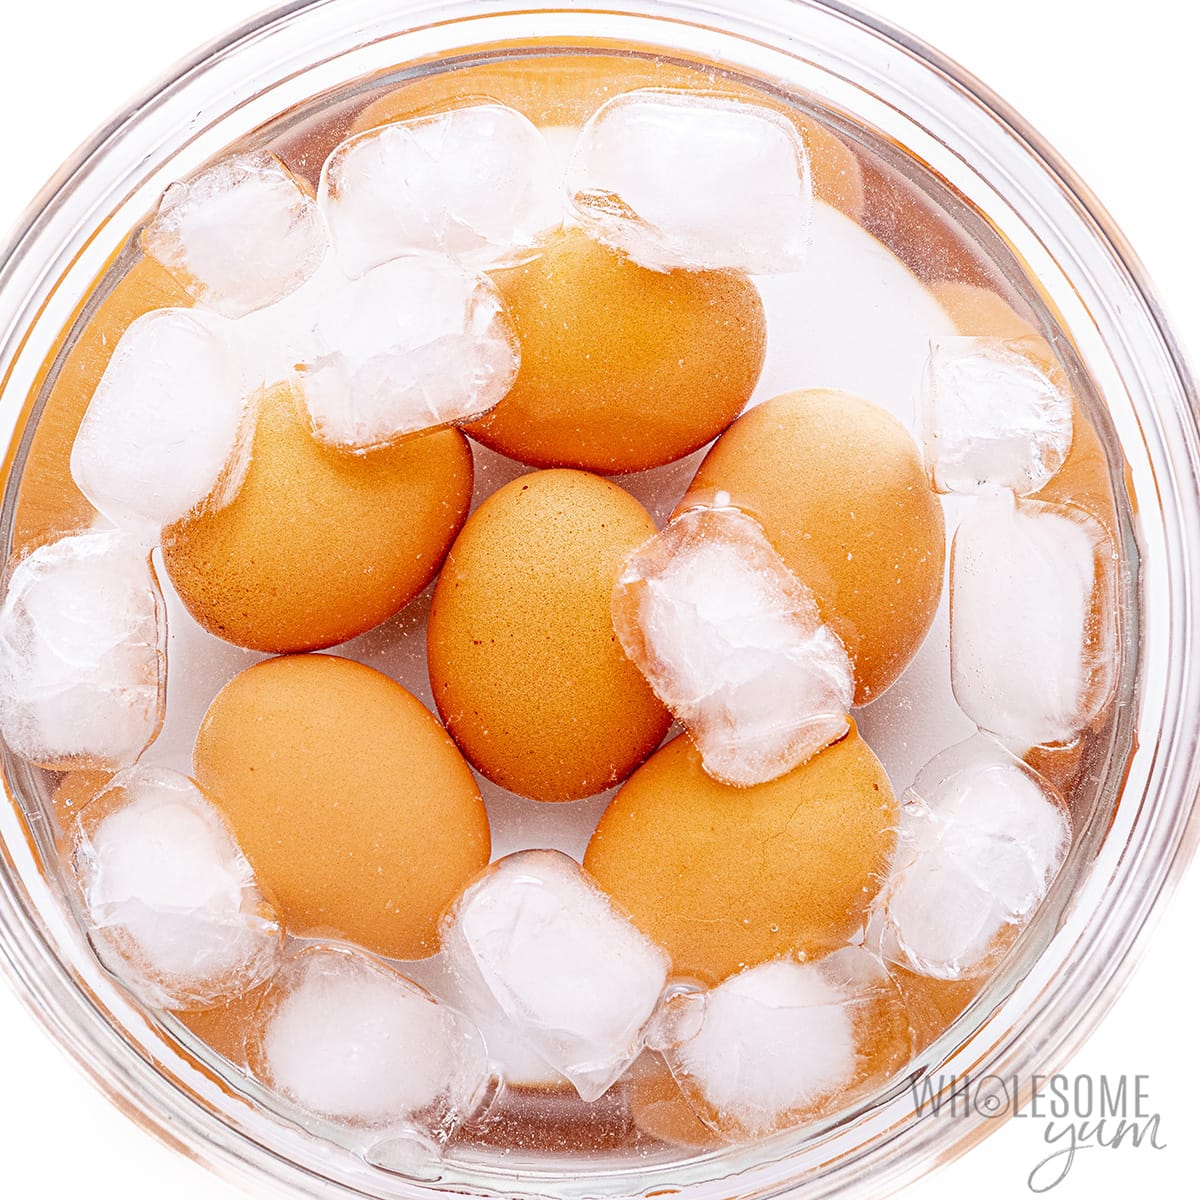 Crack the eggs into a bowl of ice water.